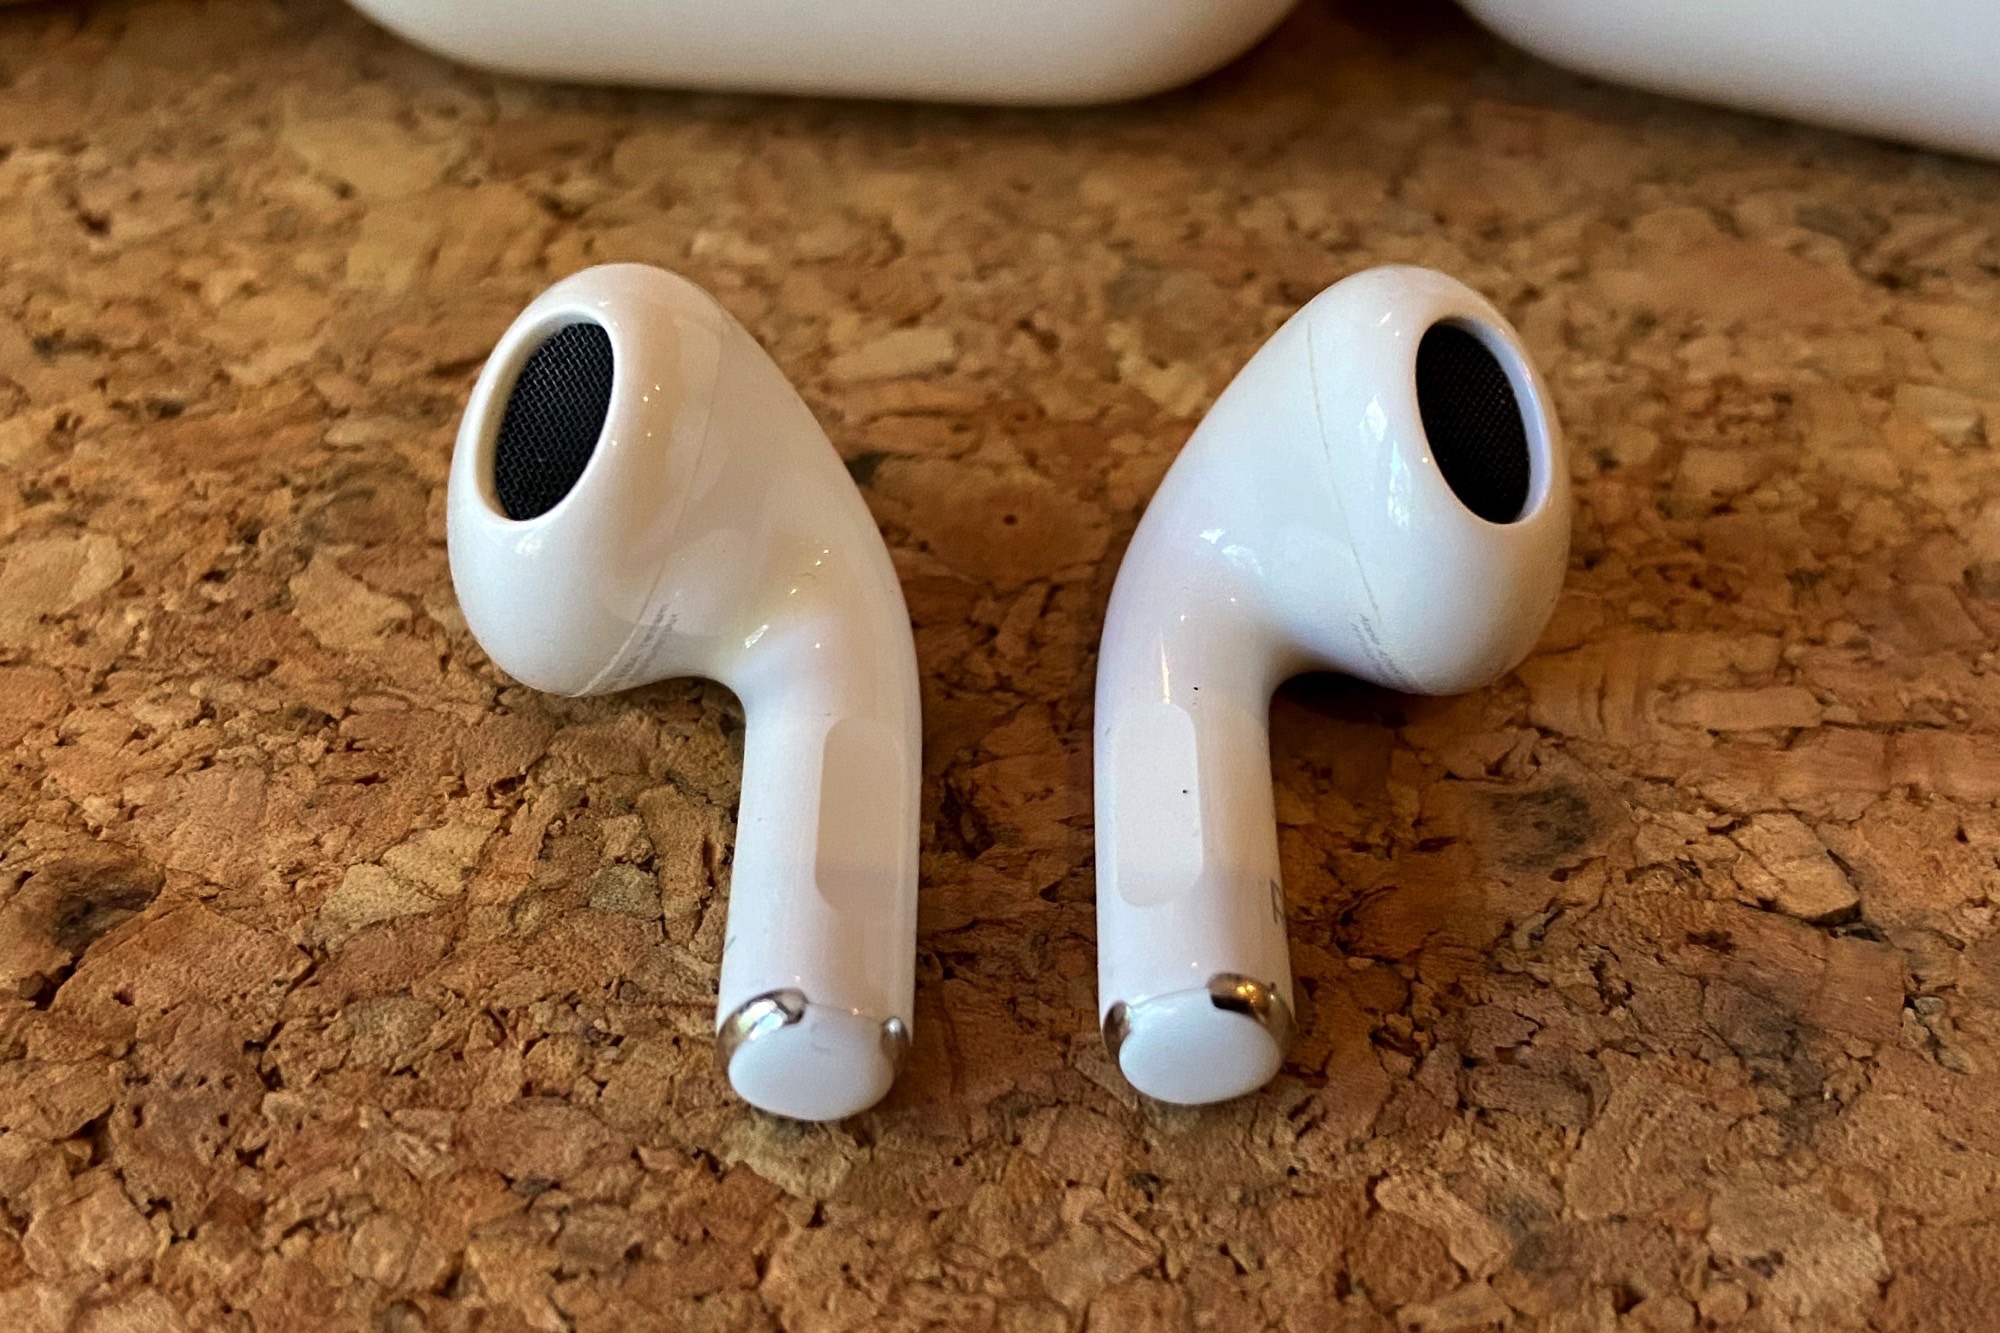 Apple AirPods (3rd Generation) review: Improvements in all the right places